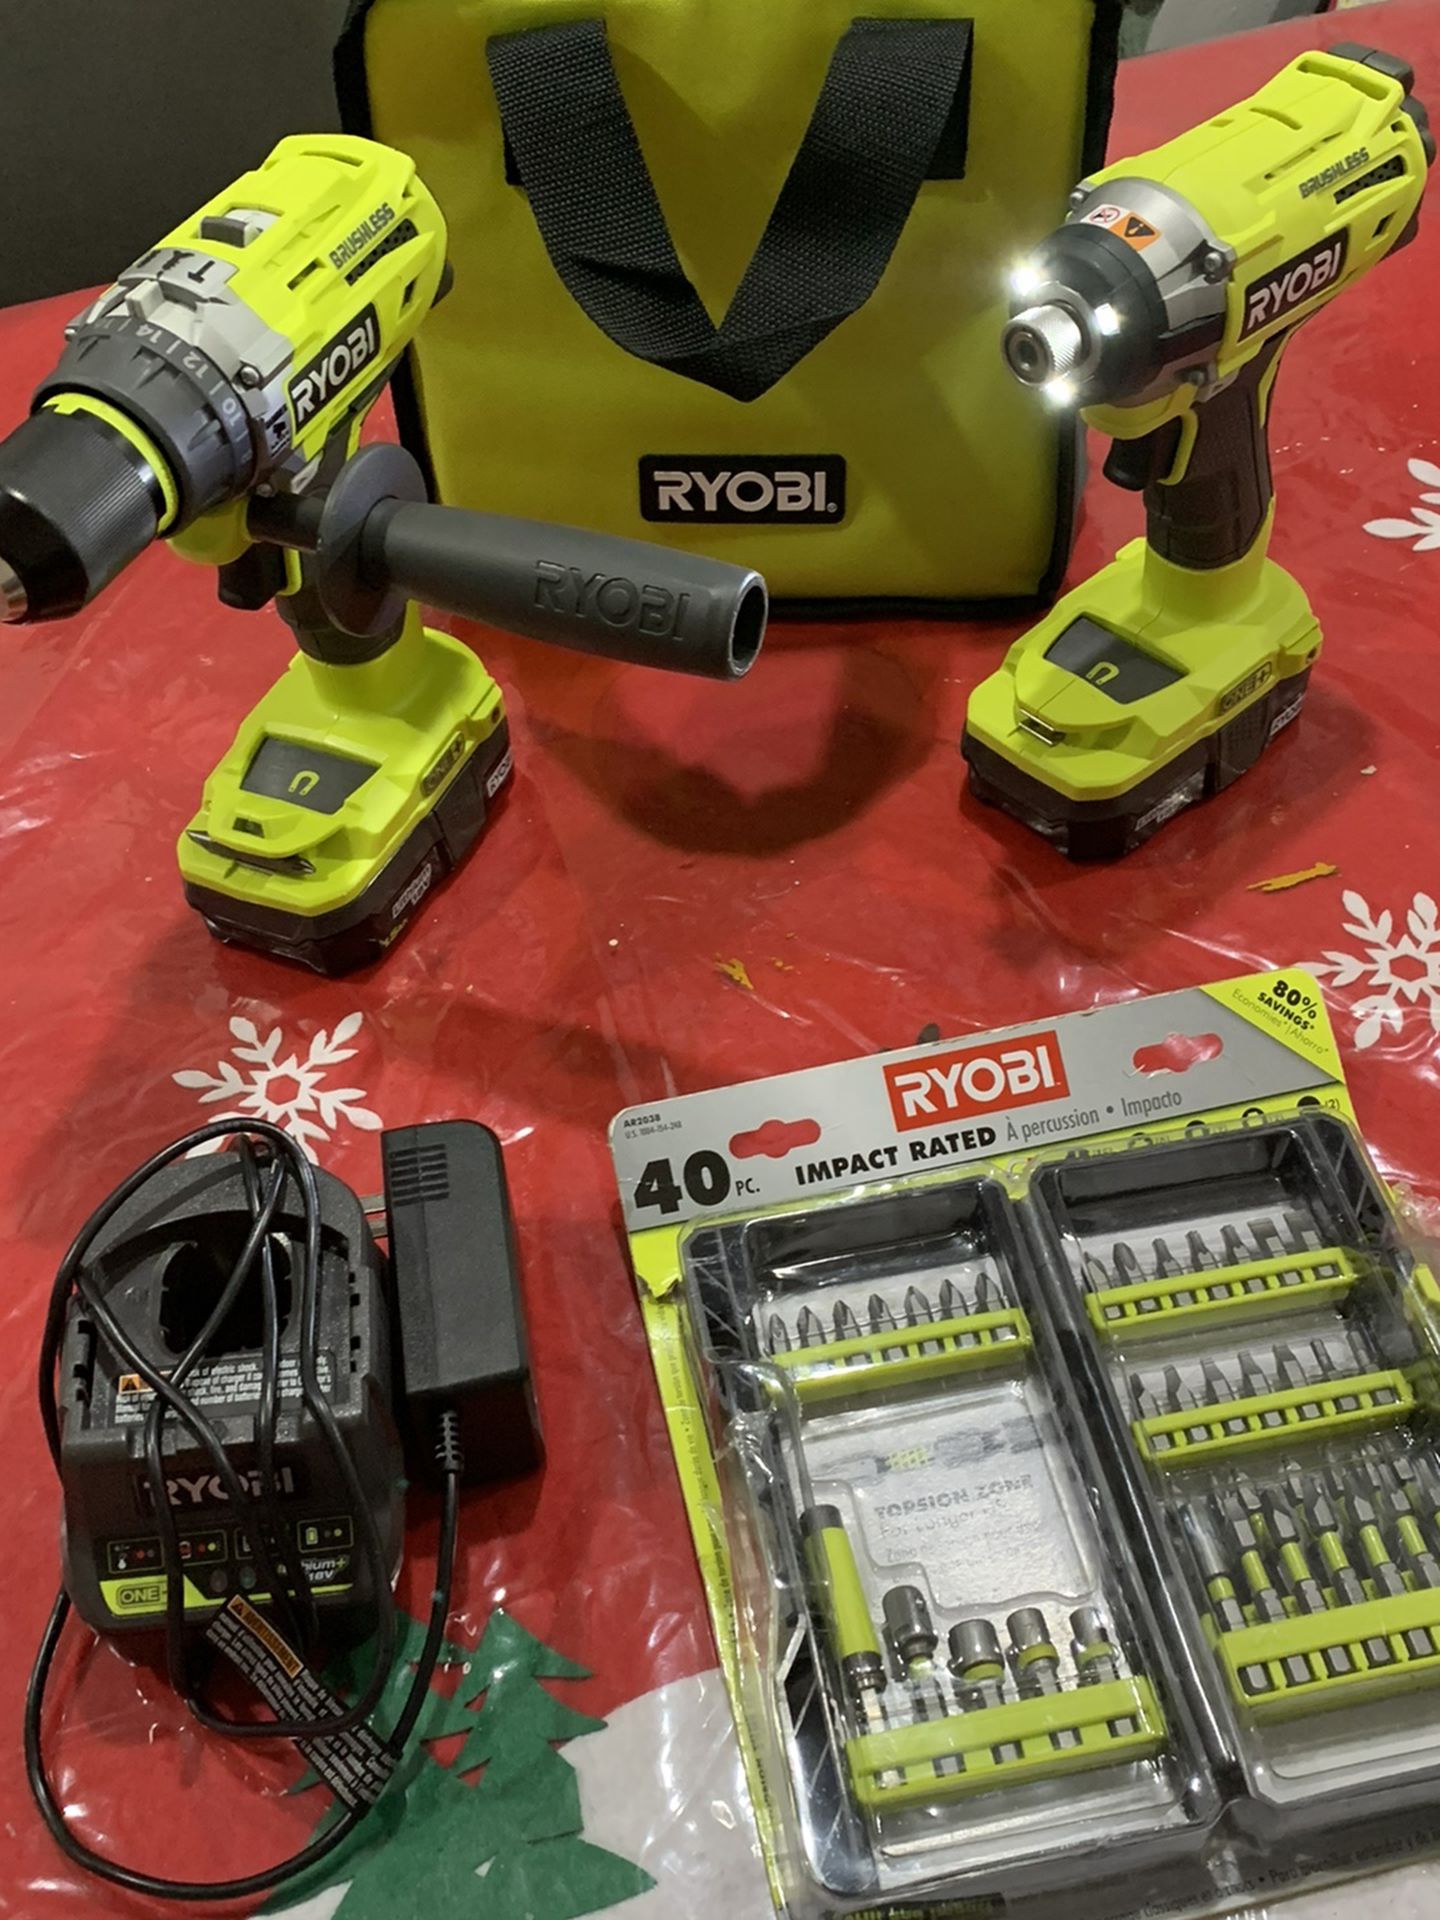 Brand new Ryobi 18v brushless hammer drill and impact with 2 batteries with charger, drill bits